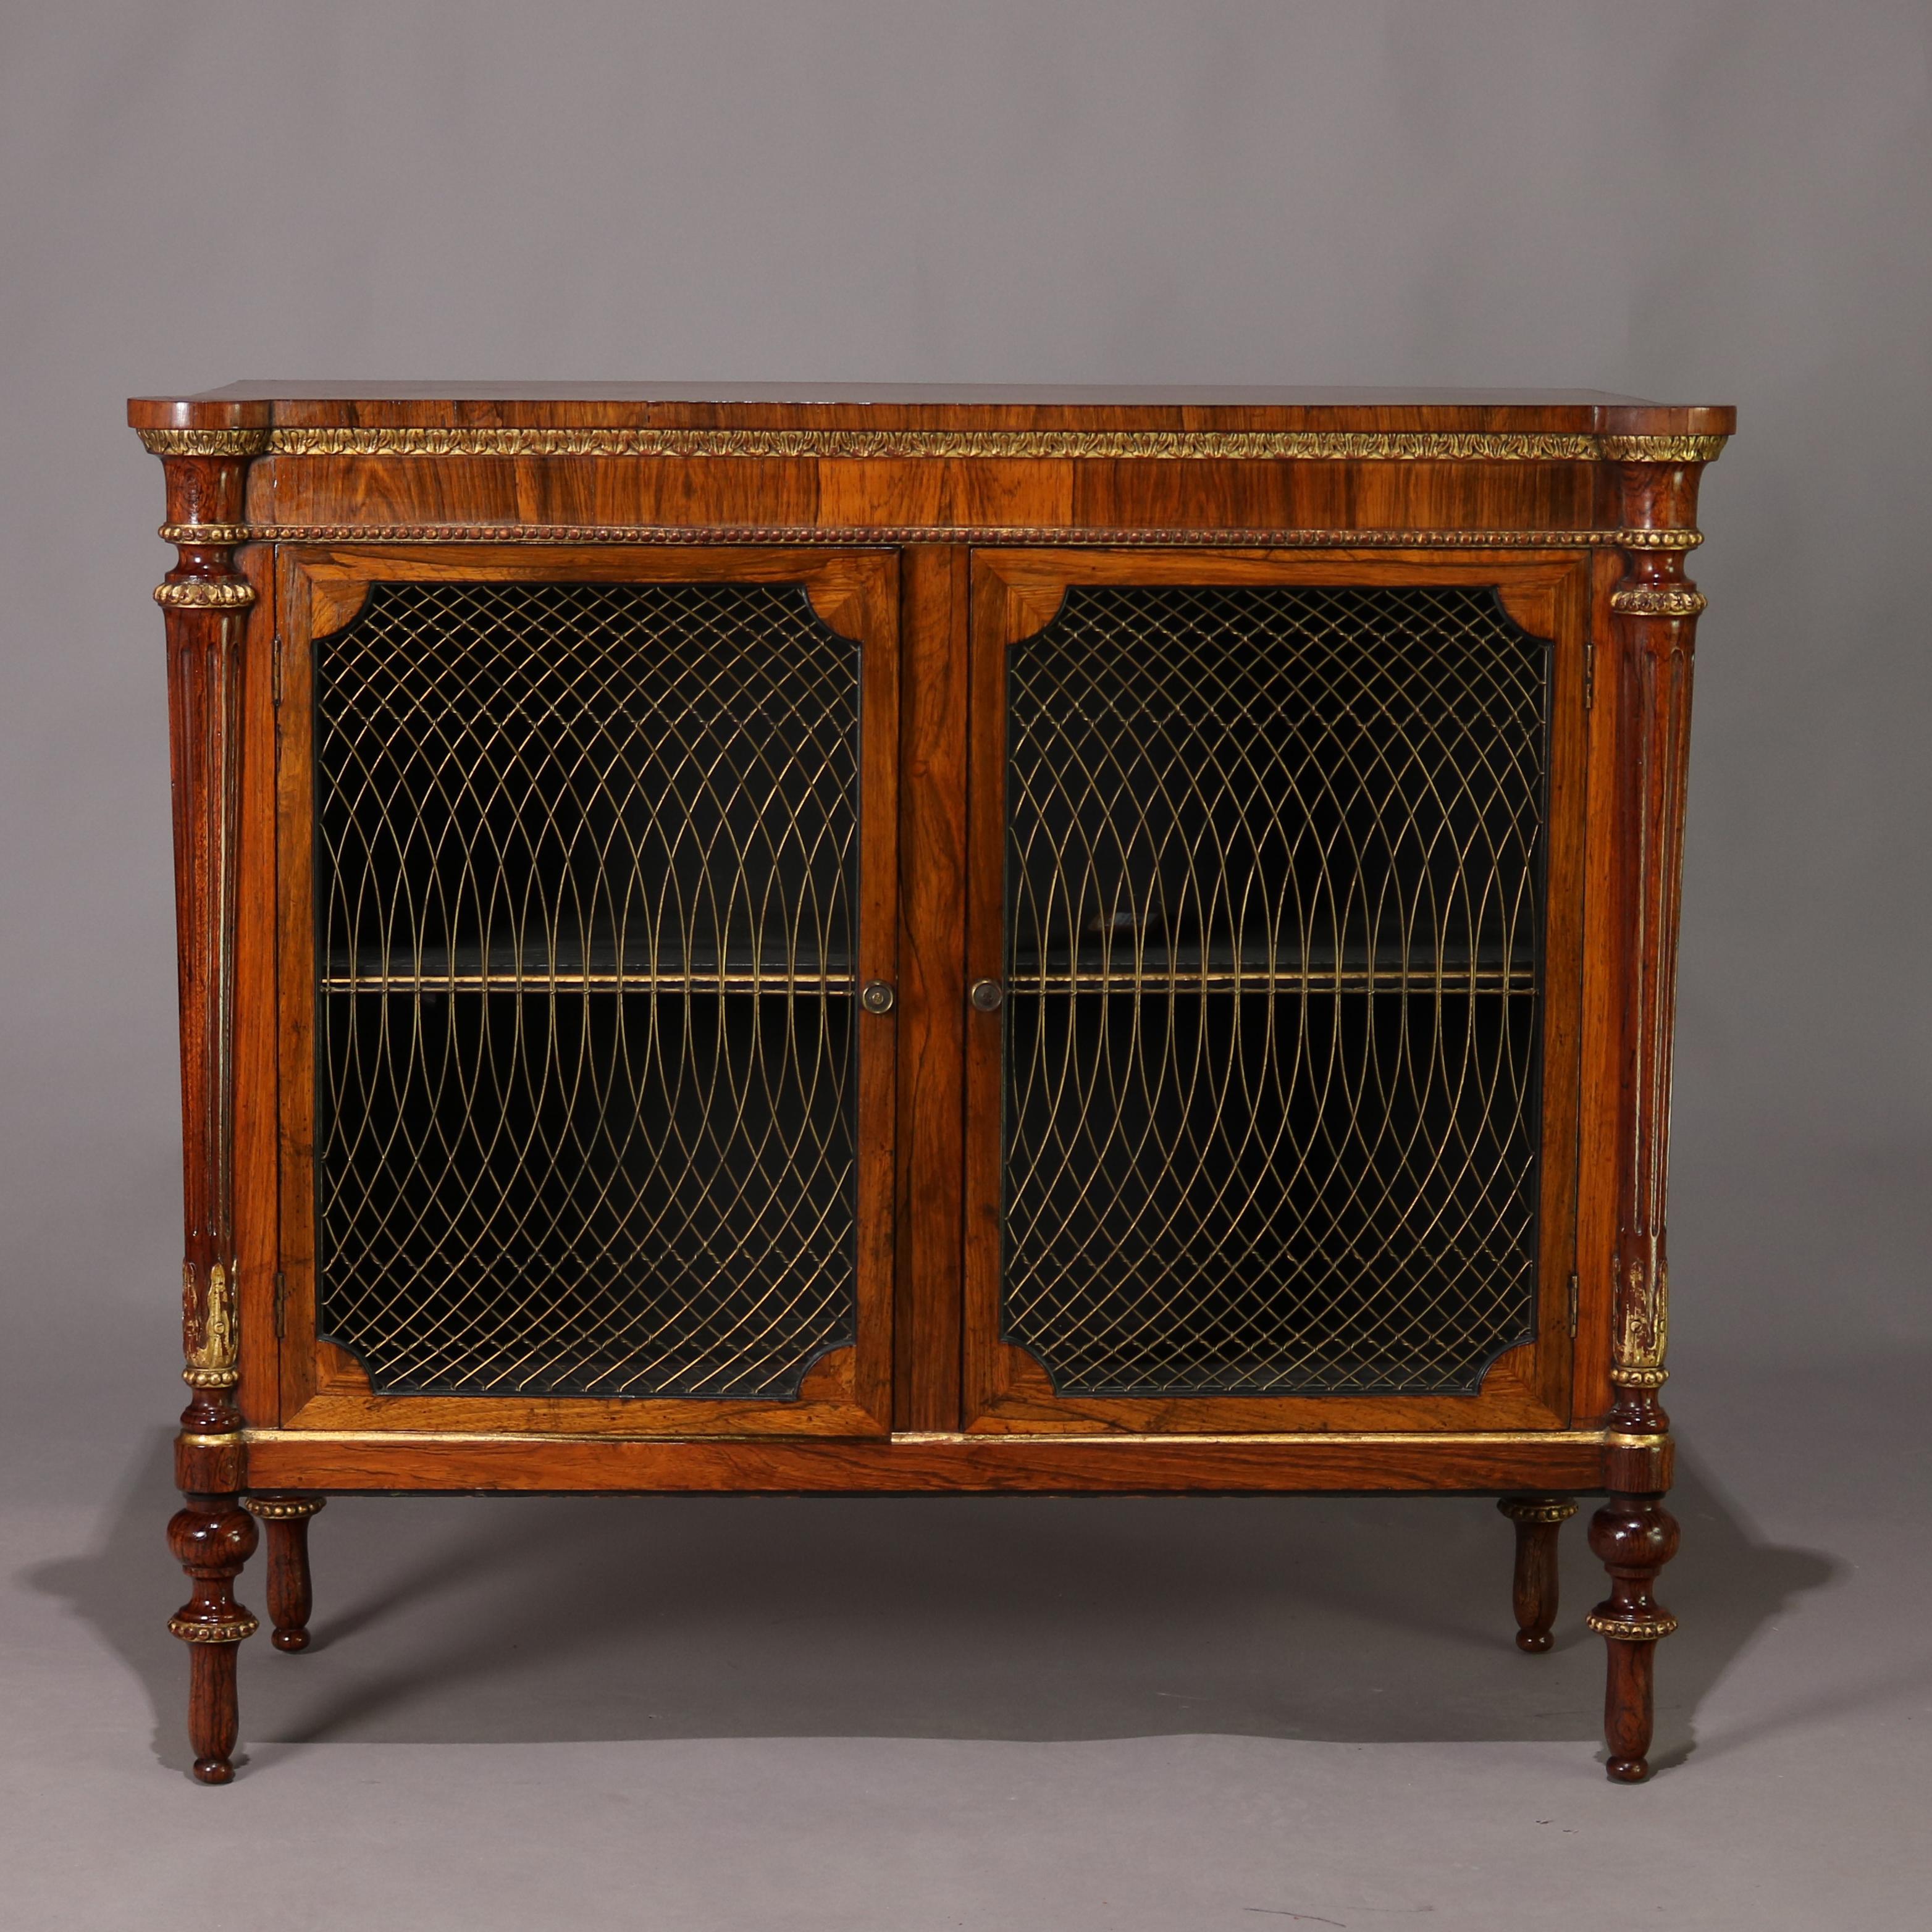 An antique English Regency credenza features rosewood construction with shaped top surmounting cabinet with foliate gilt trim and double bronze mesh doors opening to shelved interior and flanked by gilt decorated columns raised on turned and tapered